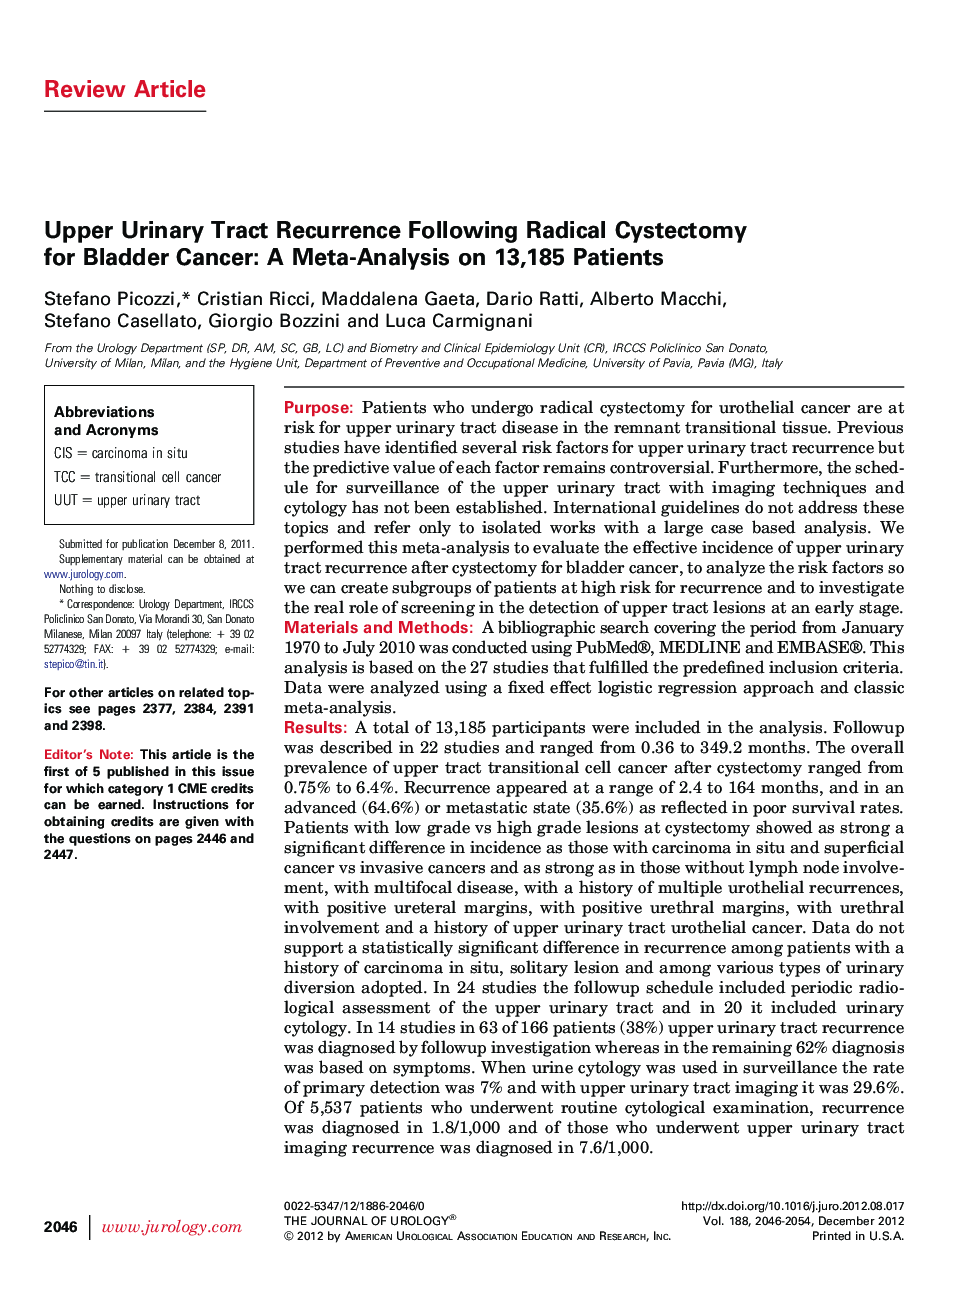 Upper Urinary Tract Recurrence Following Radical Cystectomy for Bladder Cancer: A Meta-Analysis on 13,185 Patients